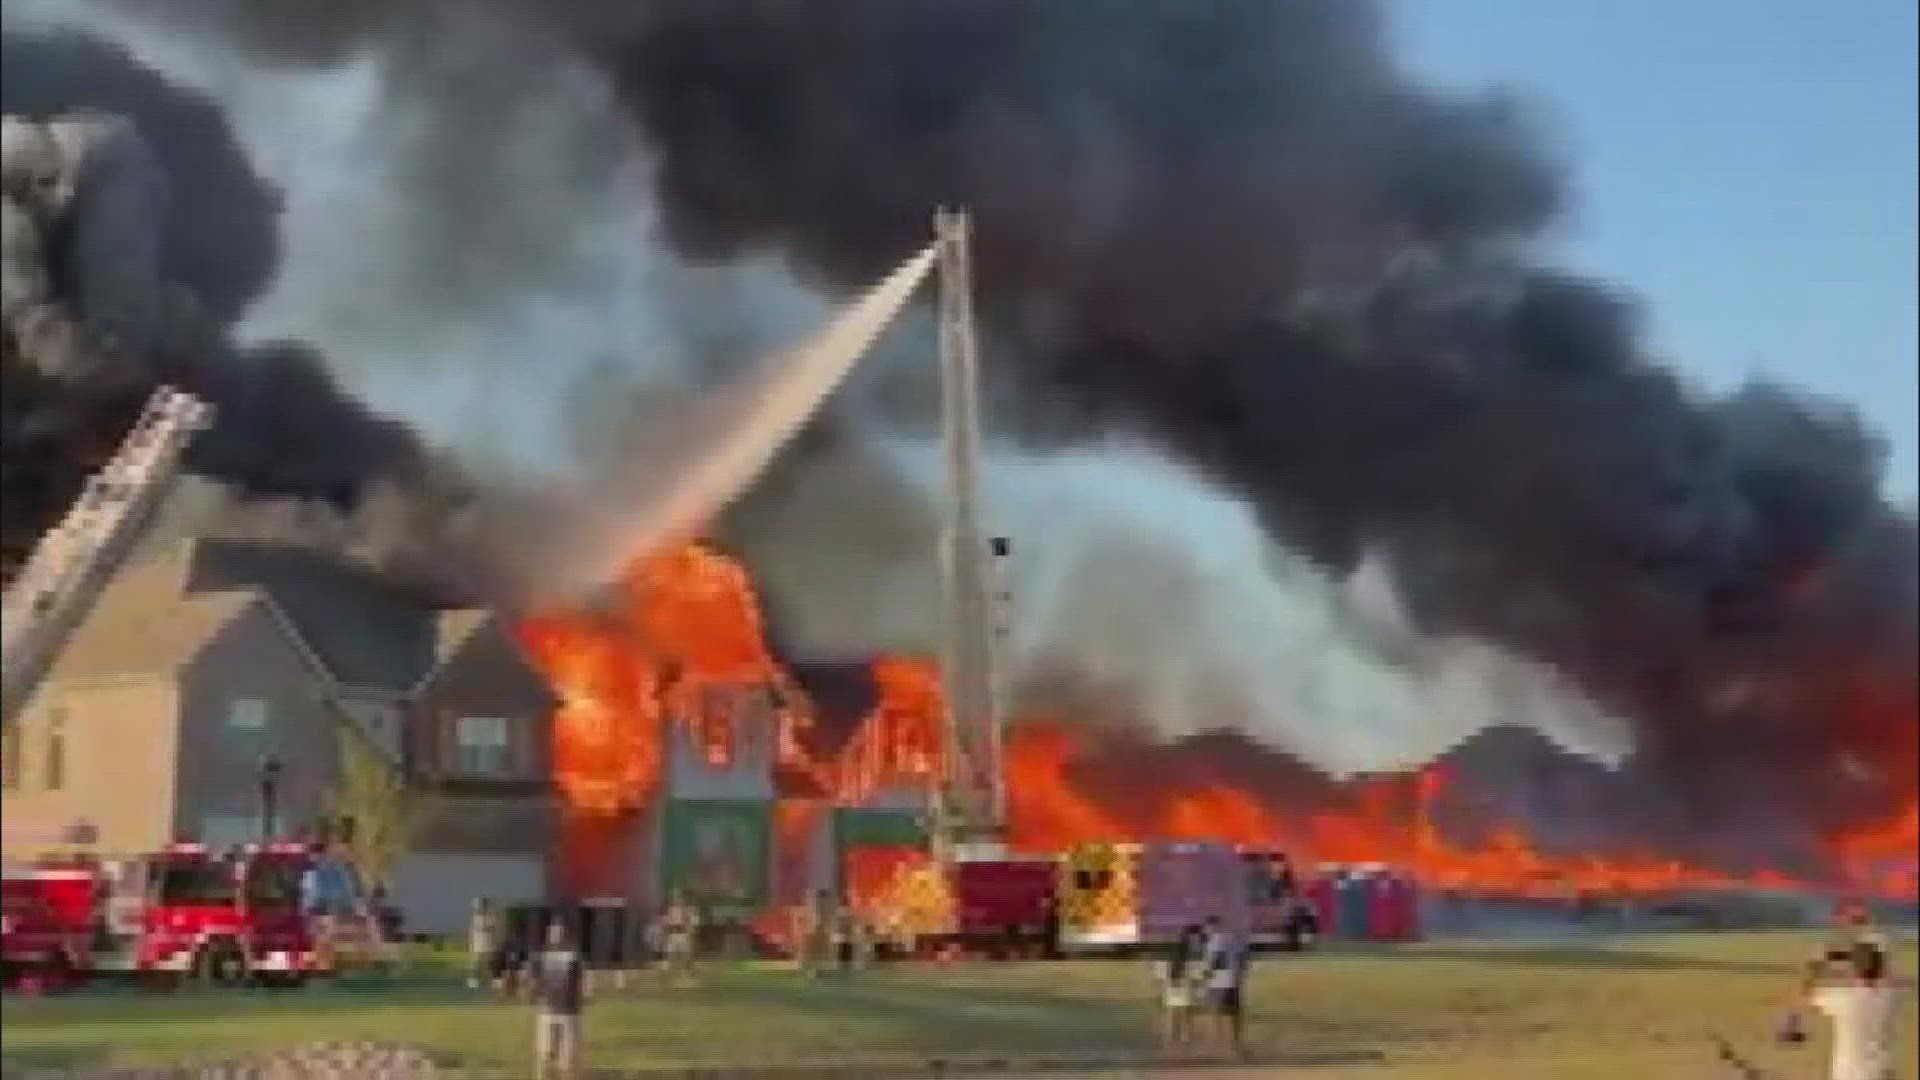 Seven homes under construction were either destroyed or heavily damaged after a massive fire in a McKinney neighborhood on Saturday, officials said.